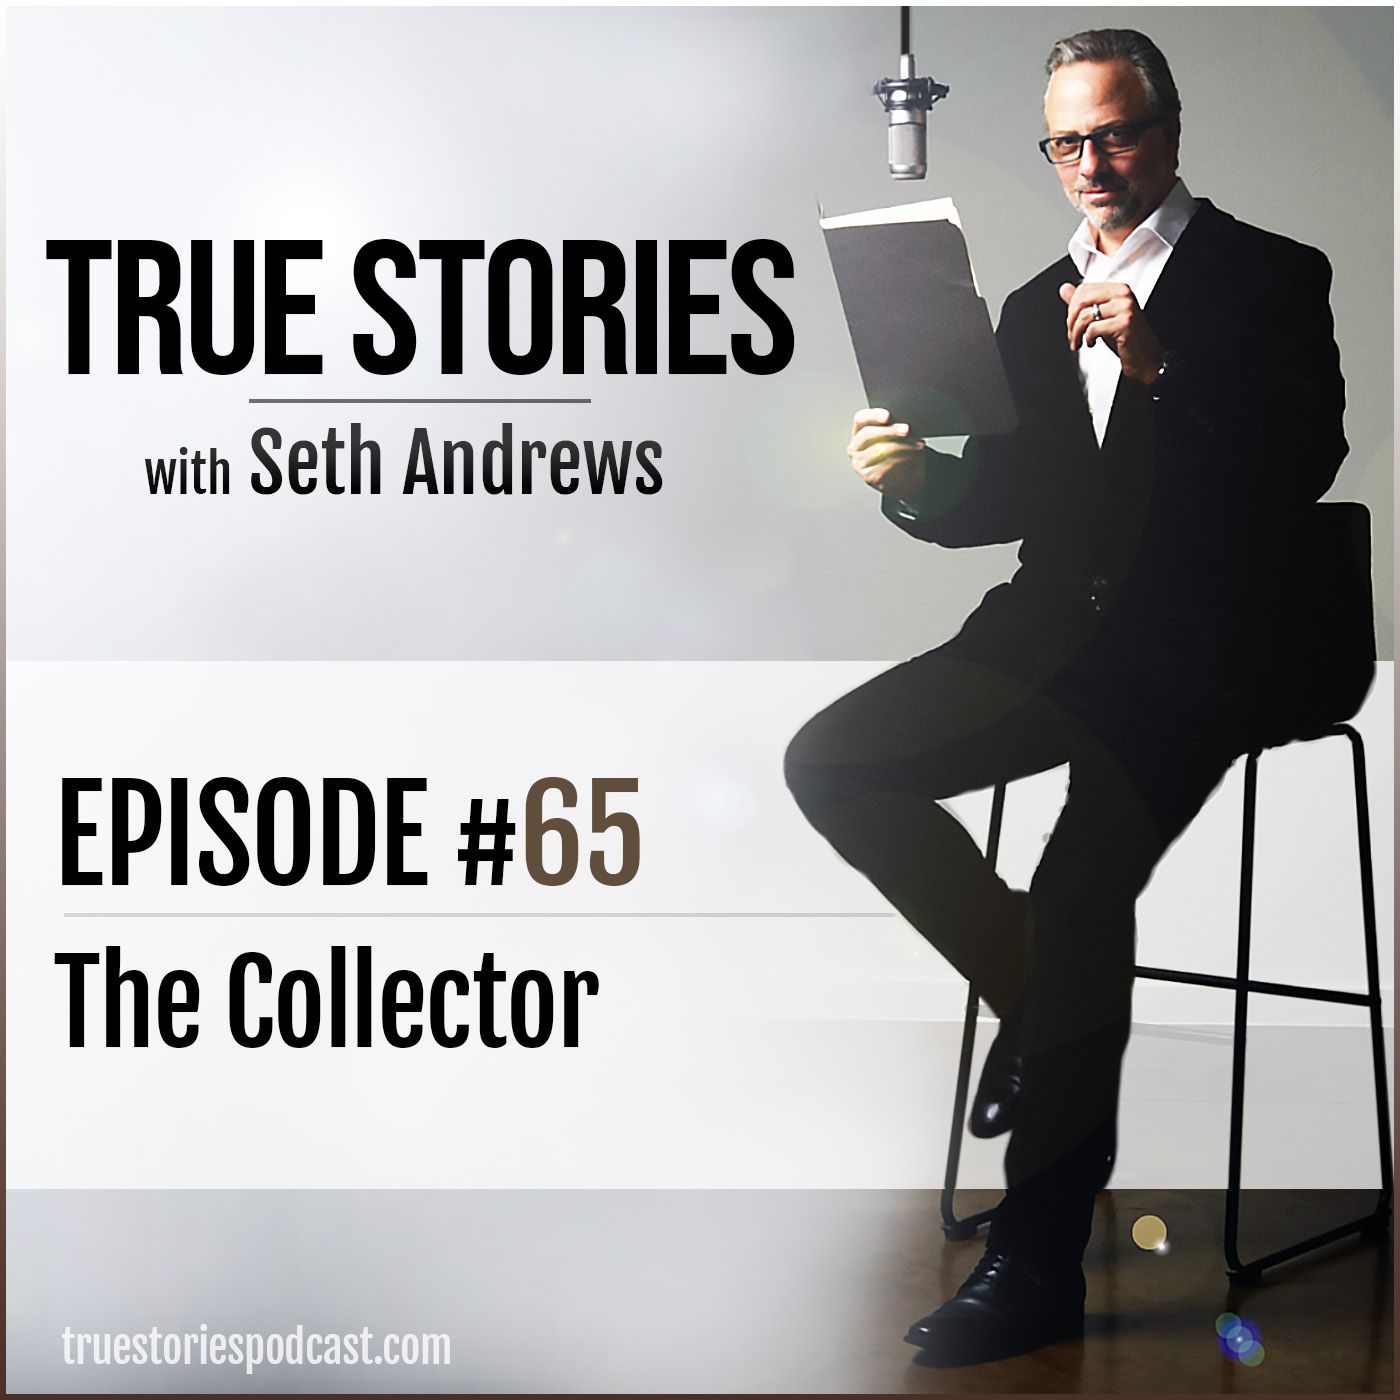 True Stories #65 - The Collector